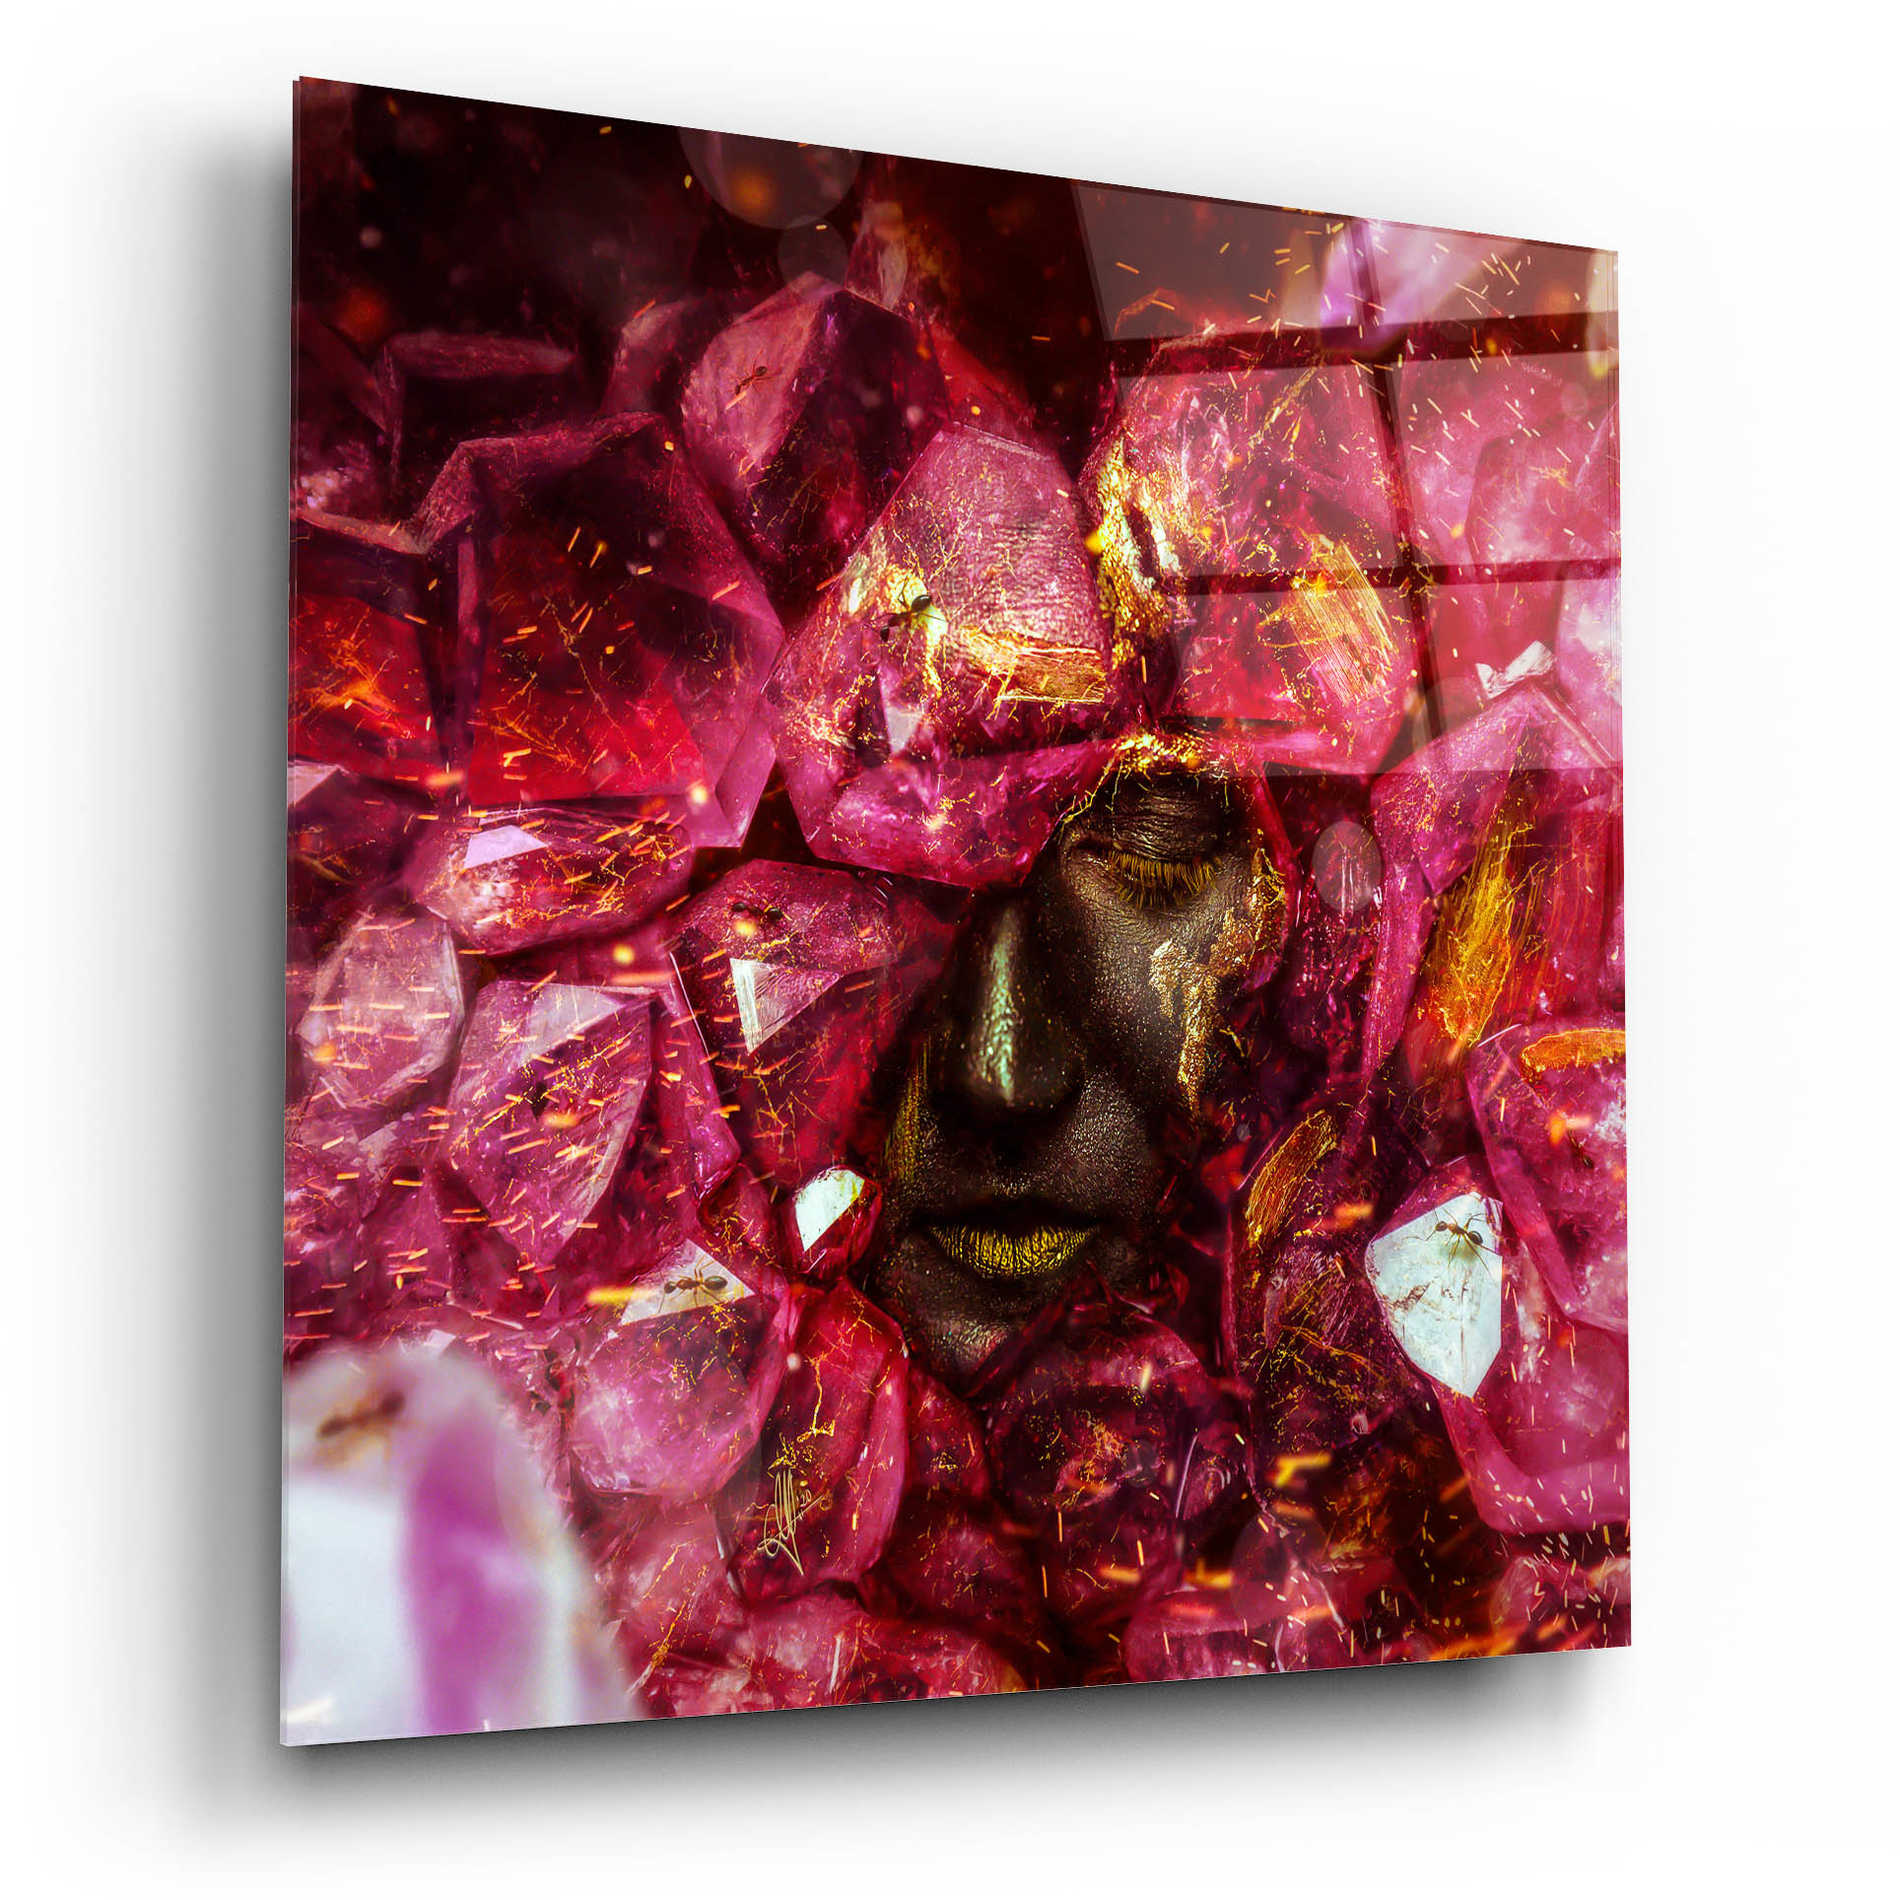 Epic Art 'States of the Matter - Crystallize' by Mario Sanchez Nevado, Acrylic Glass Wall Art,12x12